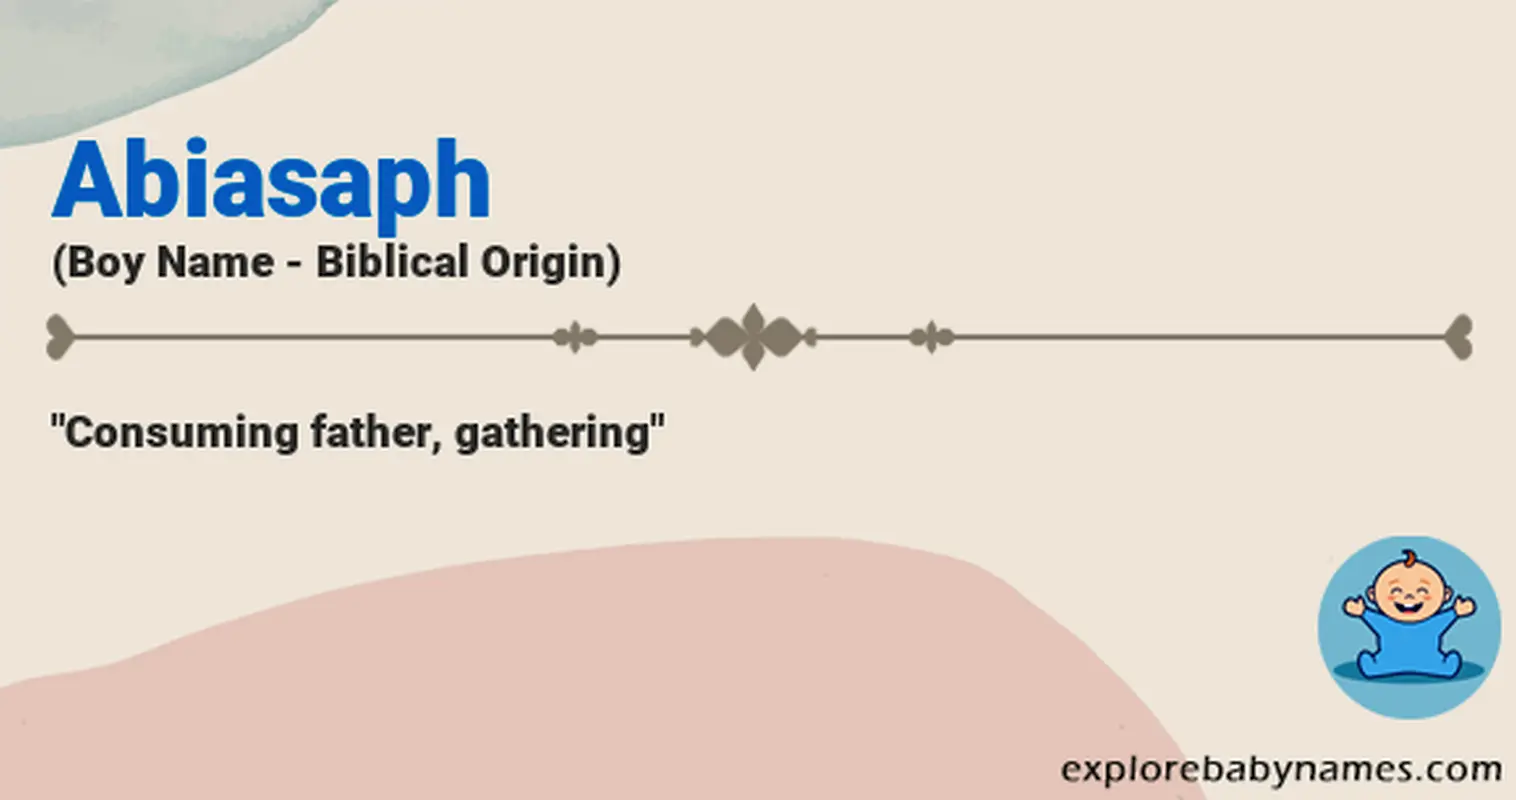 Meaning of Abiasaph